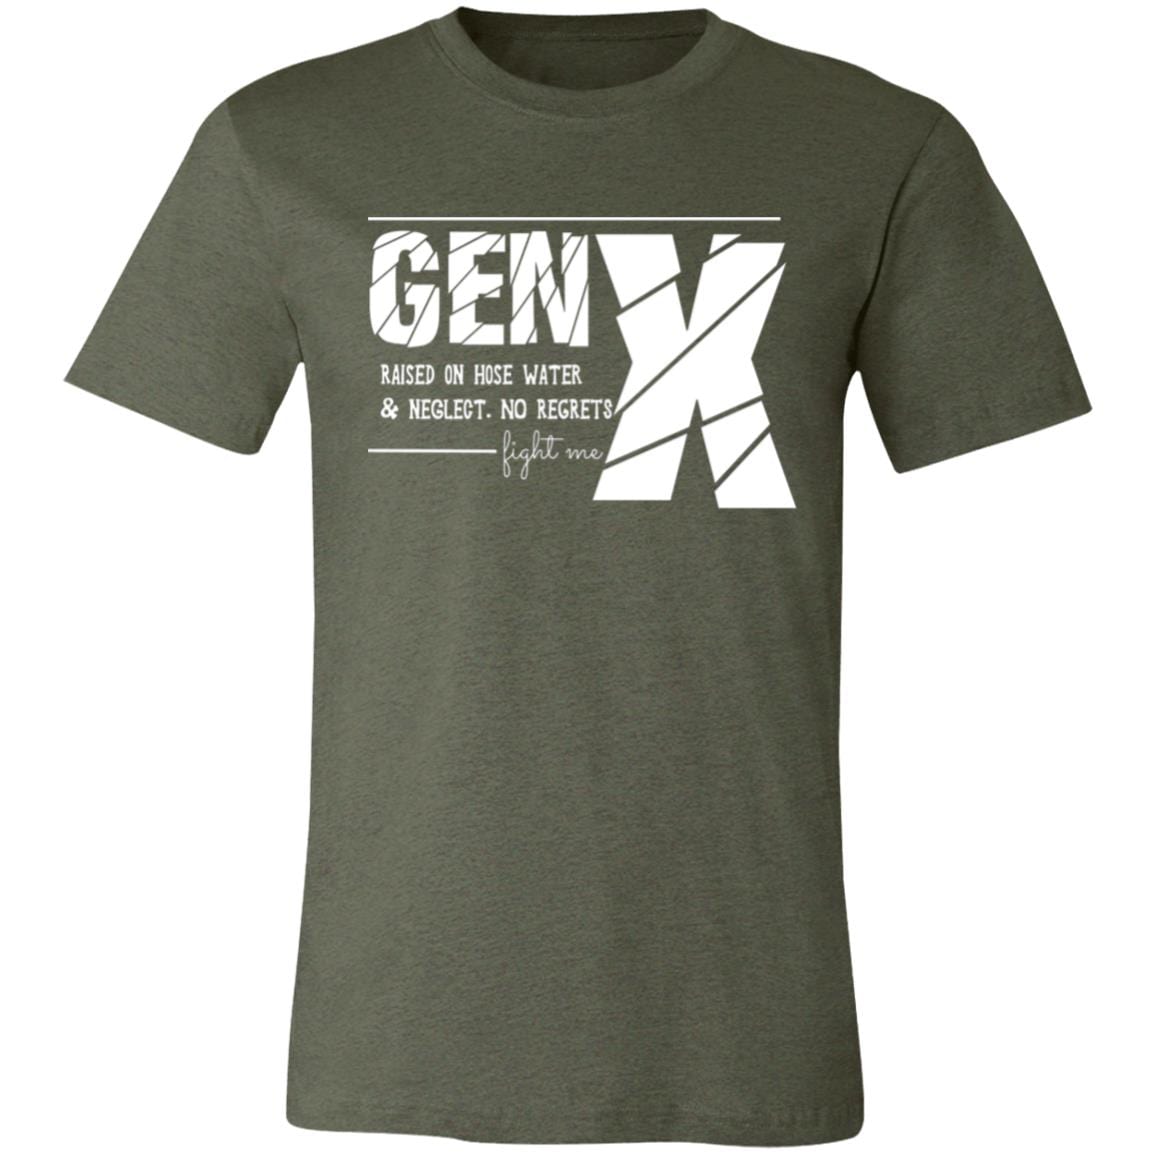 GENX Raised on Hose Water and Neglect, No Regrets | Unisex Jersey Short-Sleeve T-Shirt